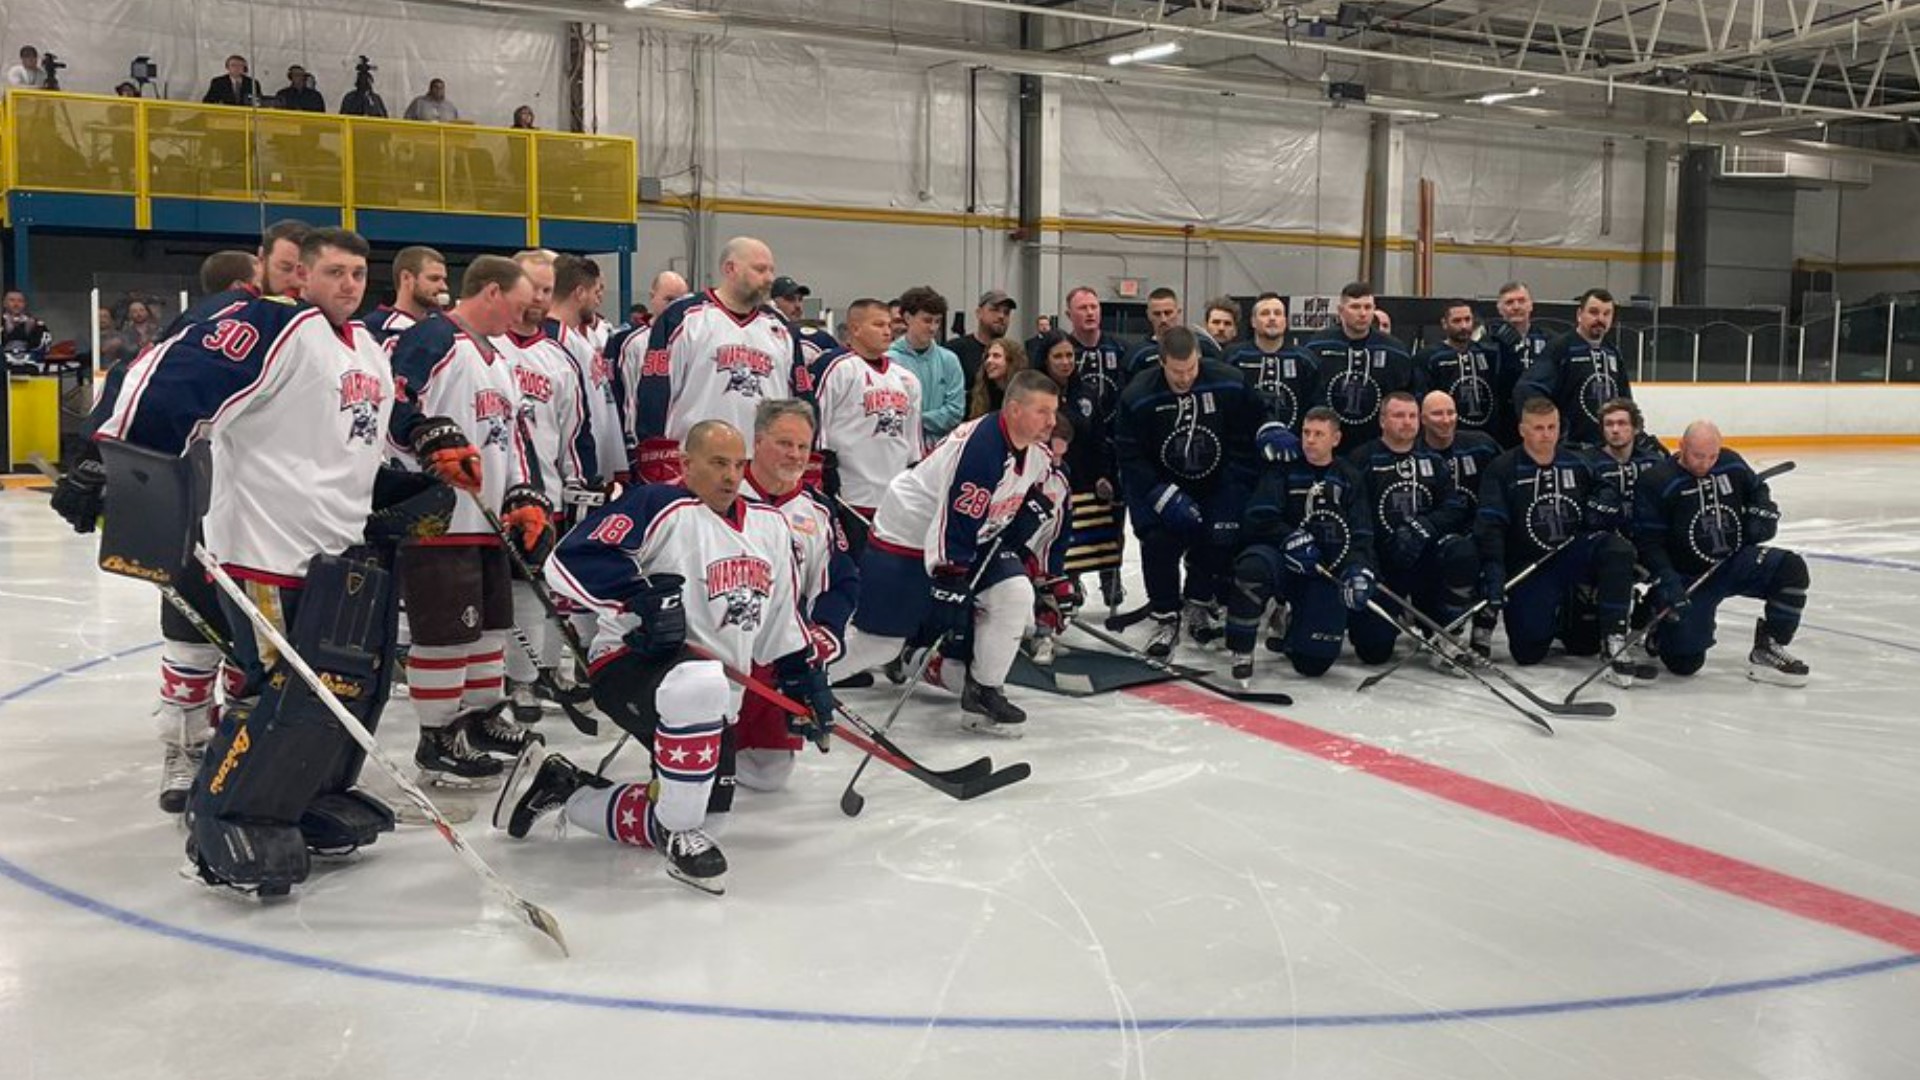 Toledo Police Hockey faced off against F.O.P. 109 Warthogs to raise money for the family of Dominic Francis, a Bluffton police officer killed in the line of duty.